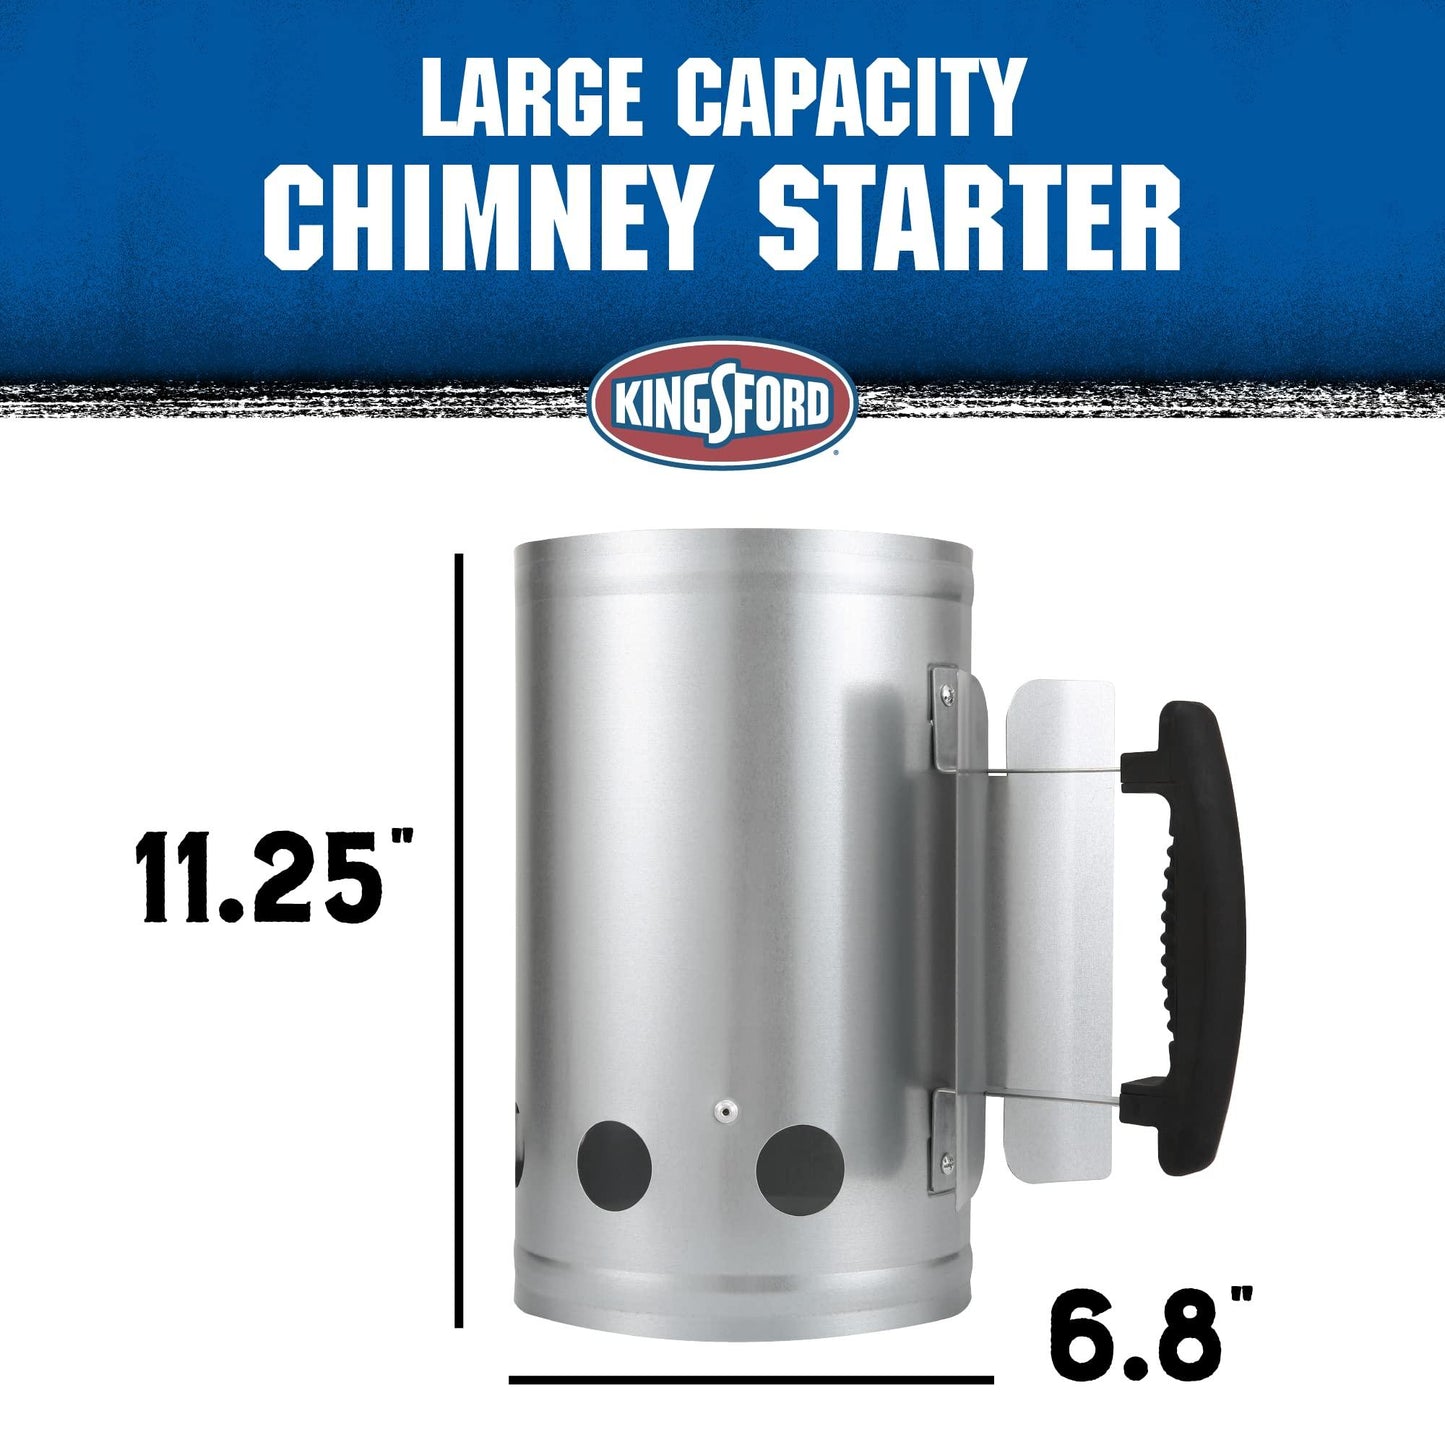 KINGSFORD Heavy Duty Deluxe Charcoal Chimney Starter | BBQ Chimney Starter for Charcoal Grill and Barbecues, Compact Easy to Use Chimney Starters and BBQ Grill Tools, Silver - CookCave